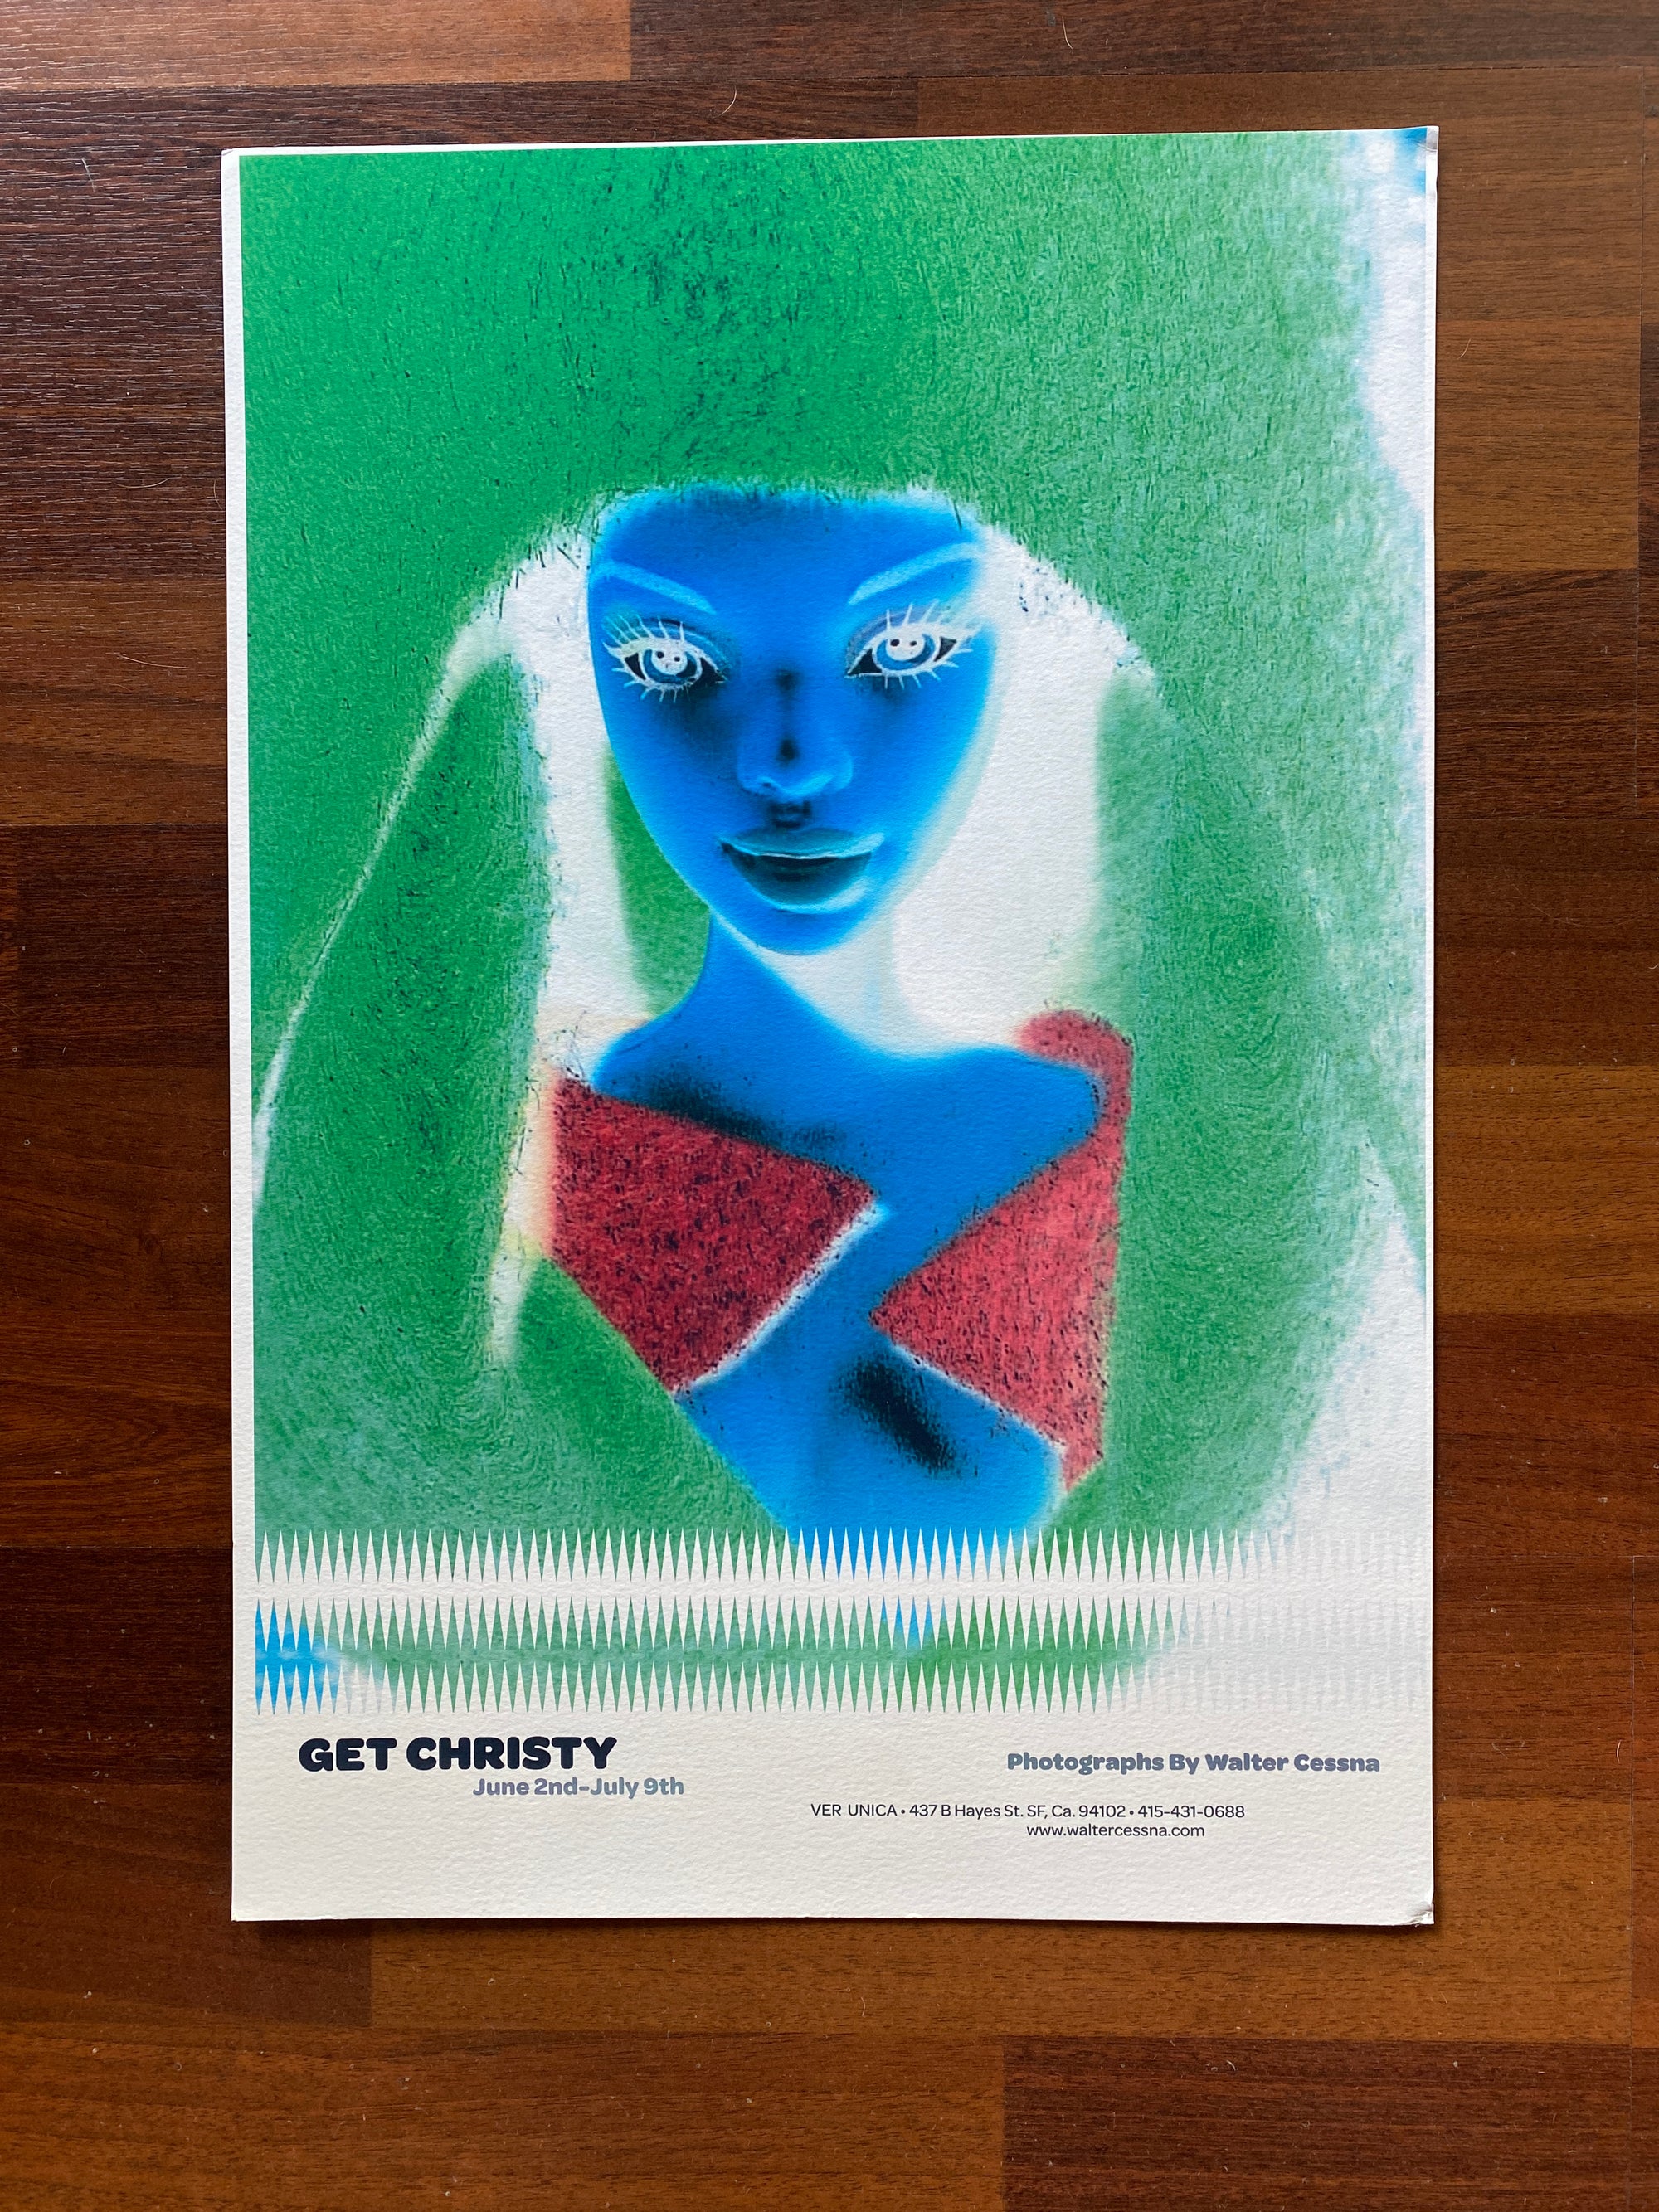 "Get Christy" fashion poster by Ver Unica & Walter Cessna